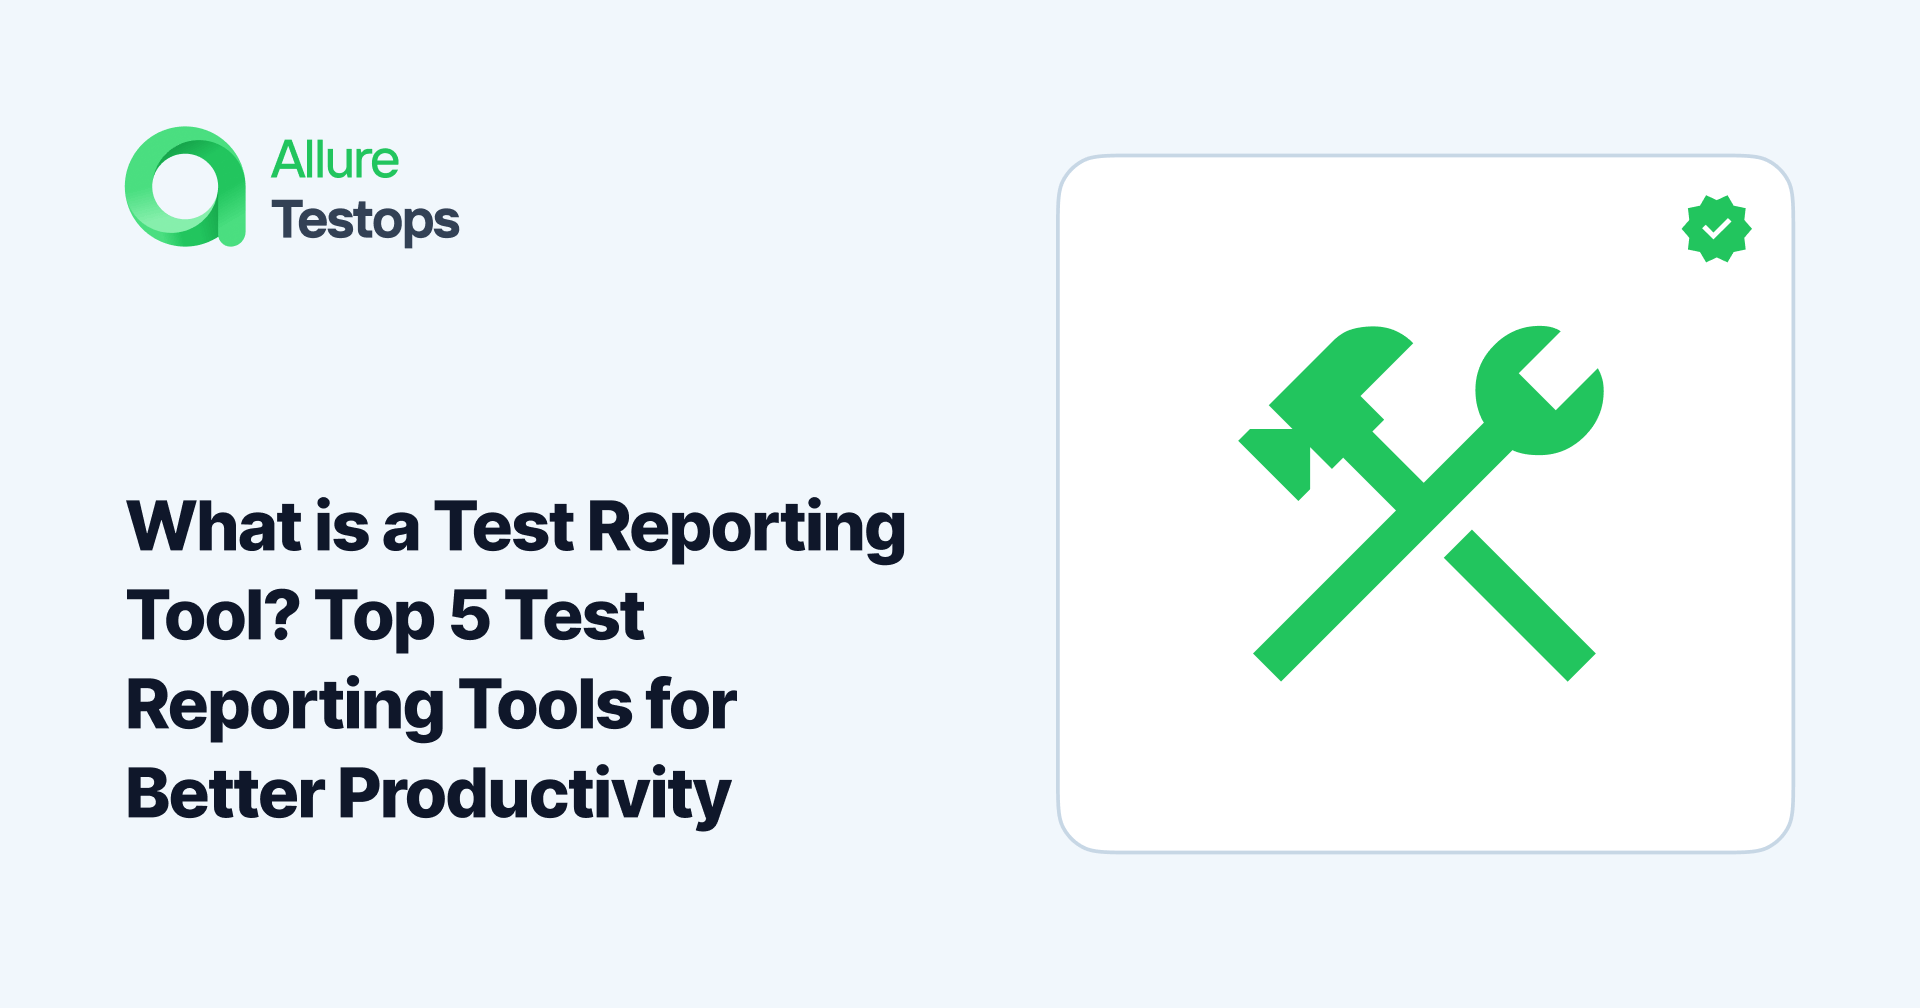 What is a Test Reporting Tool? Top 5 Test Reporting Tools for Better Productivity